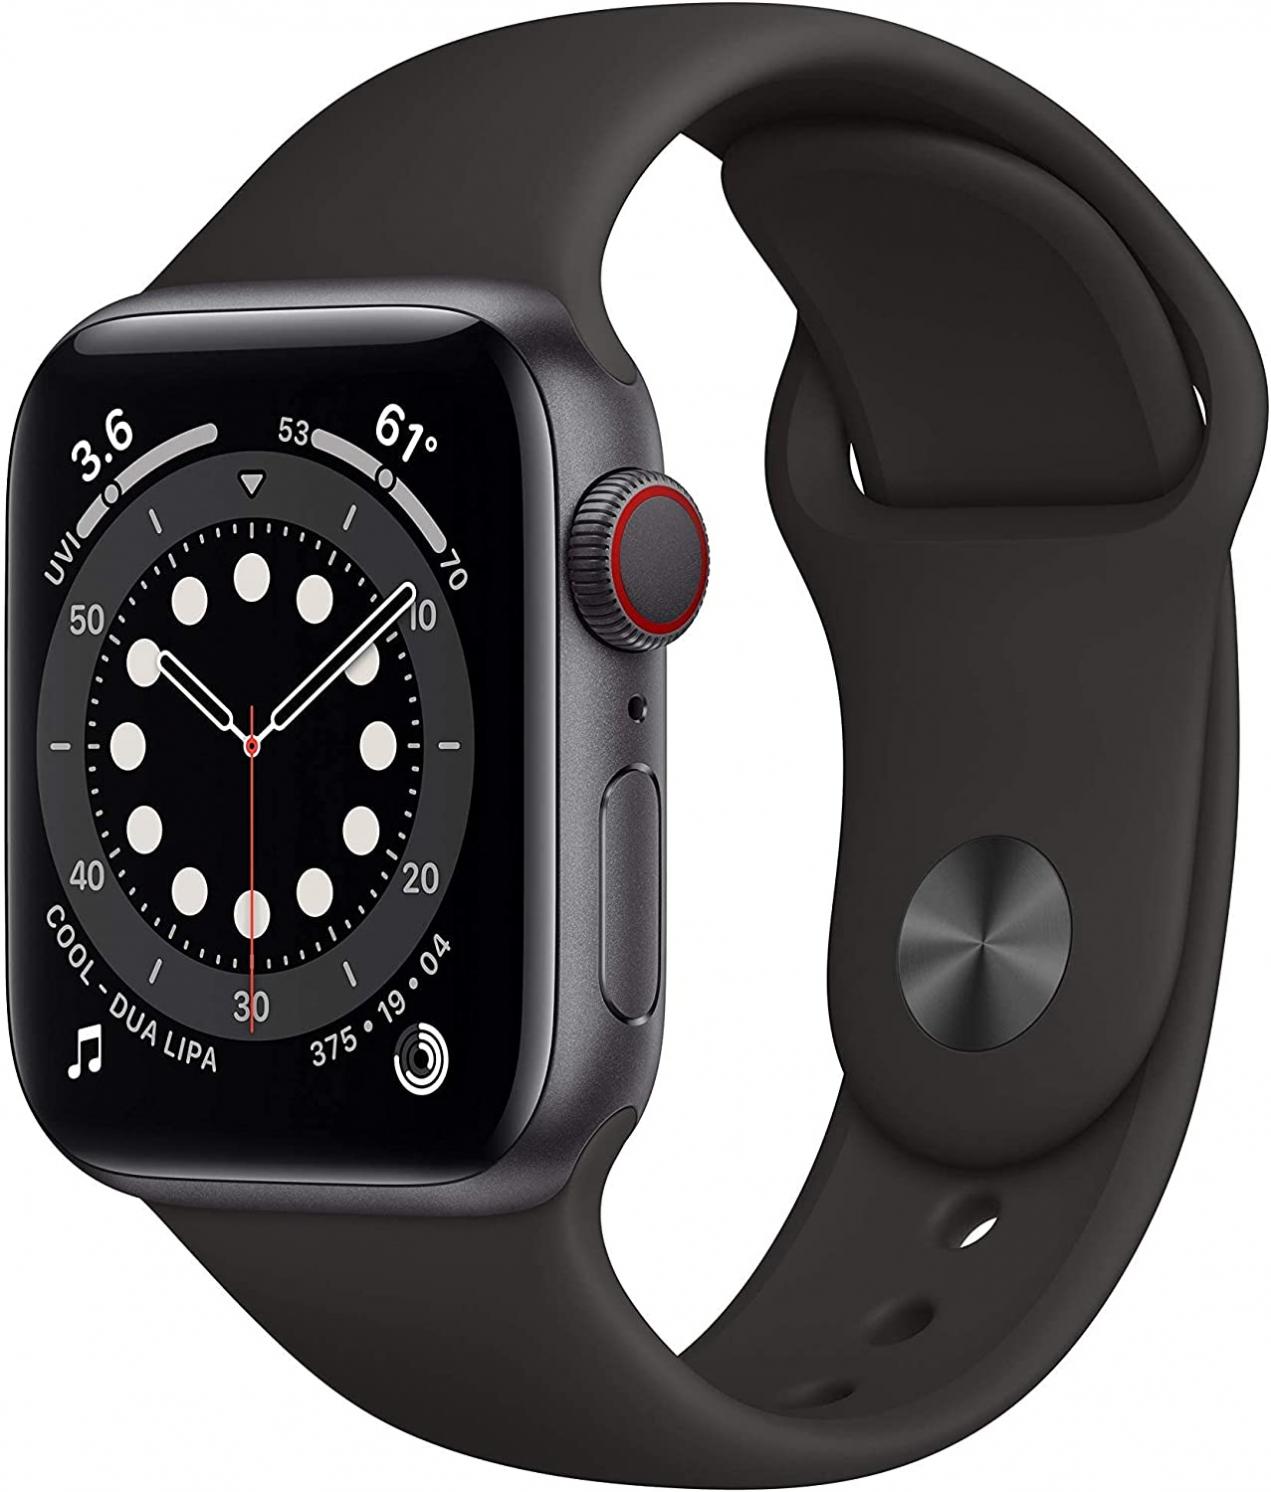 Apple Watch Series 6 (GPS + Cellular, 40mm) - Space Gray Aluminum Case with Black Sport Band (Renewed)